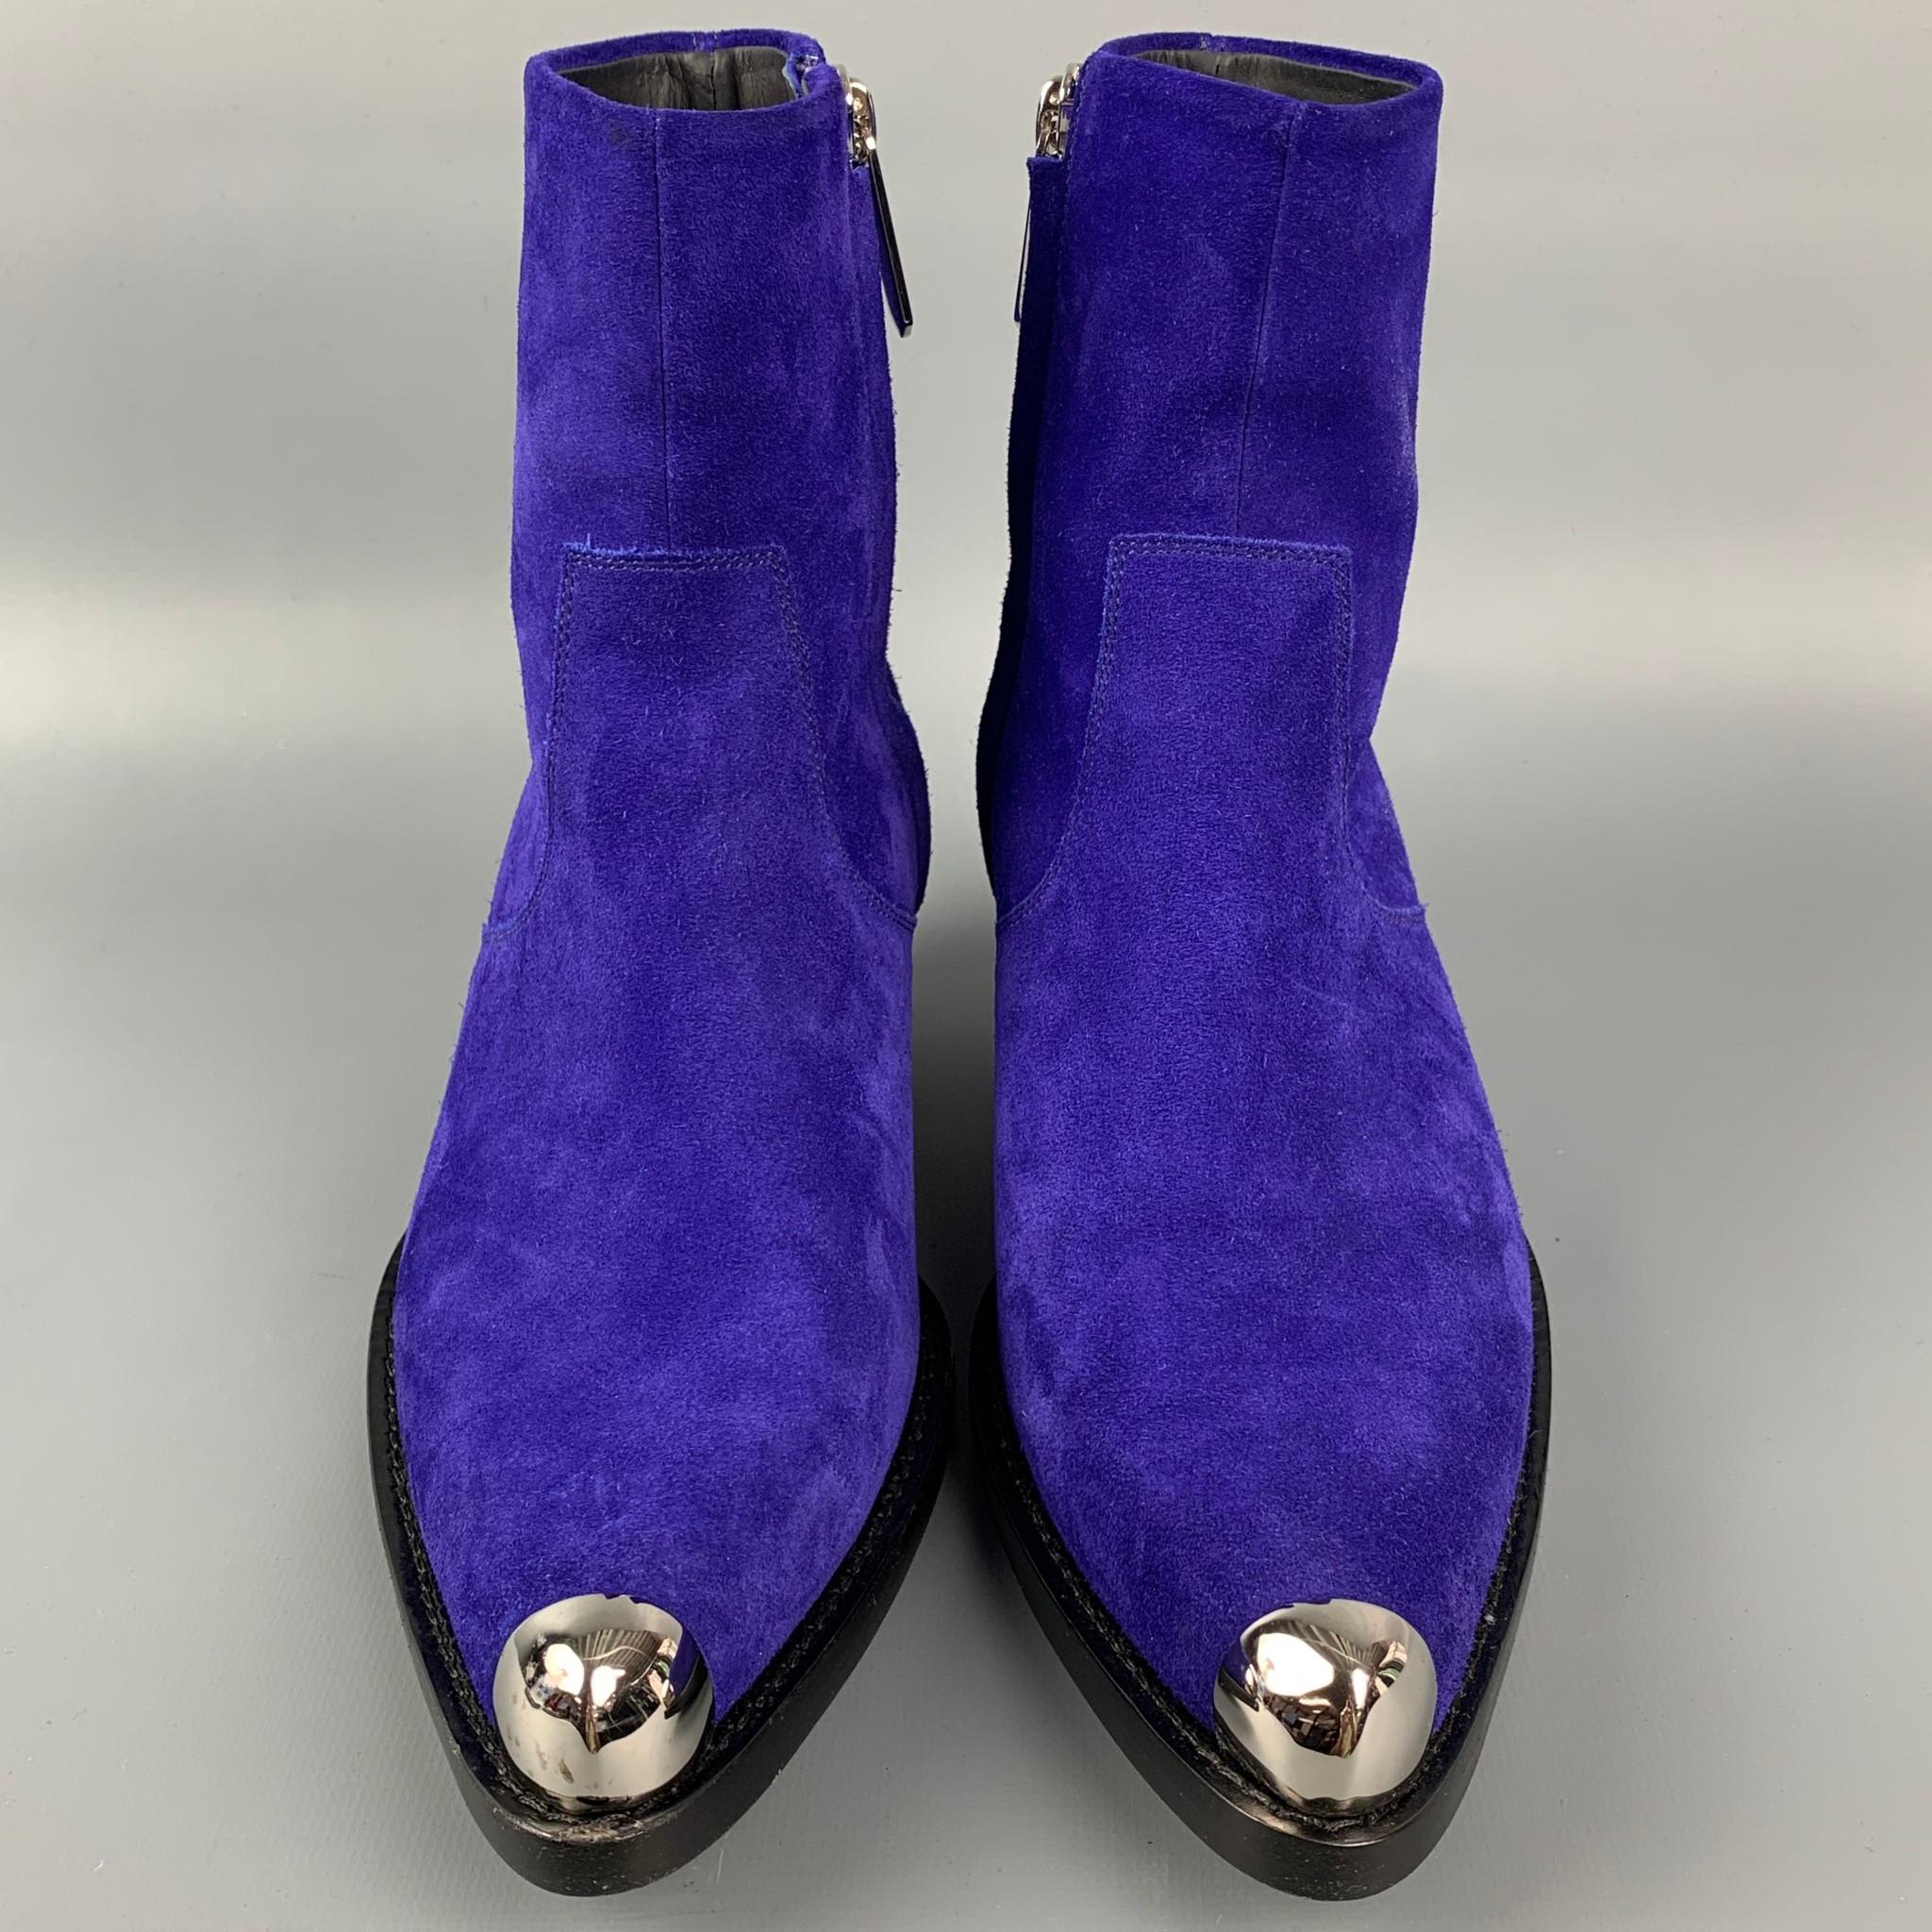 Men's CALVIN KLEIN 205W39NYC Size 6.5 Purple Leather Ankle Boots